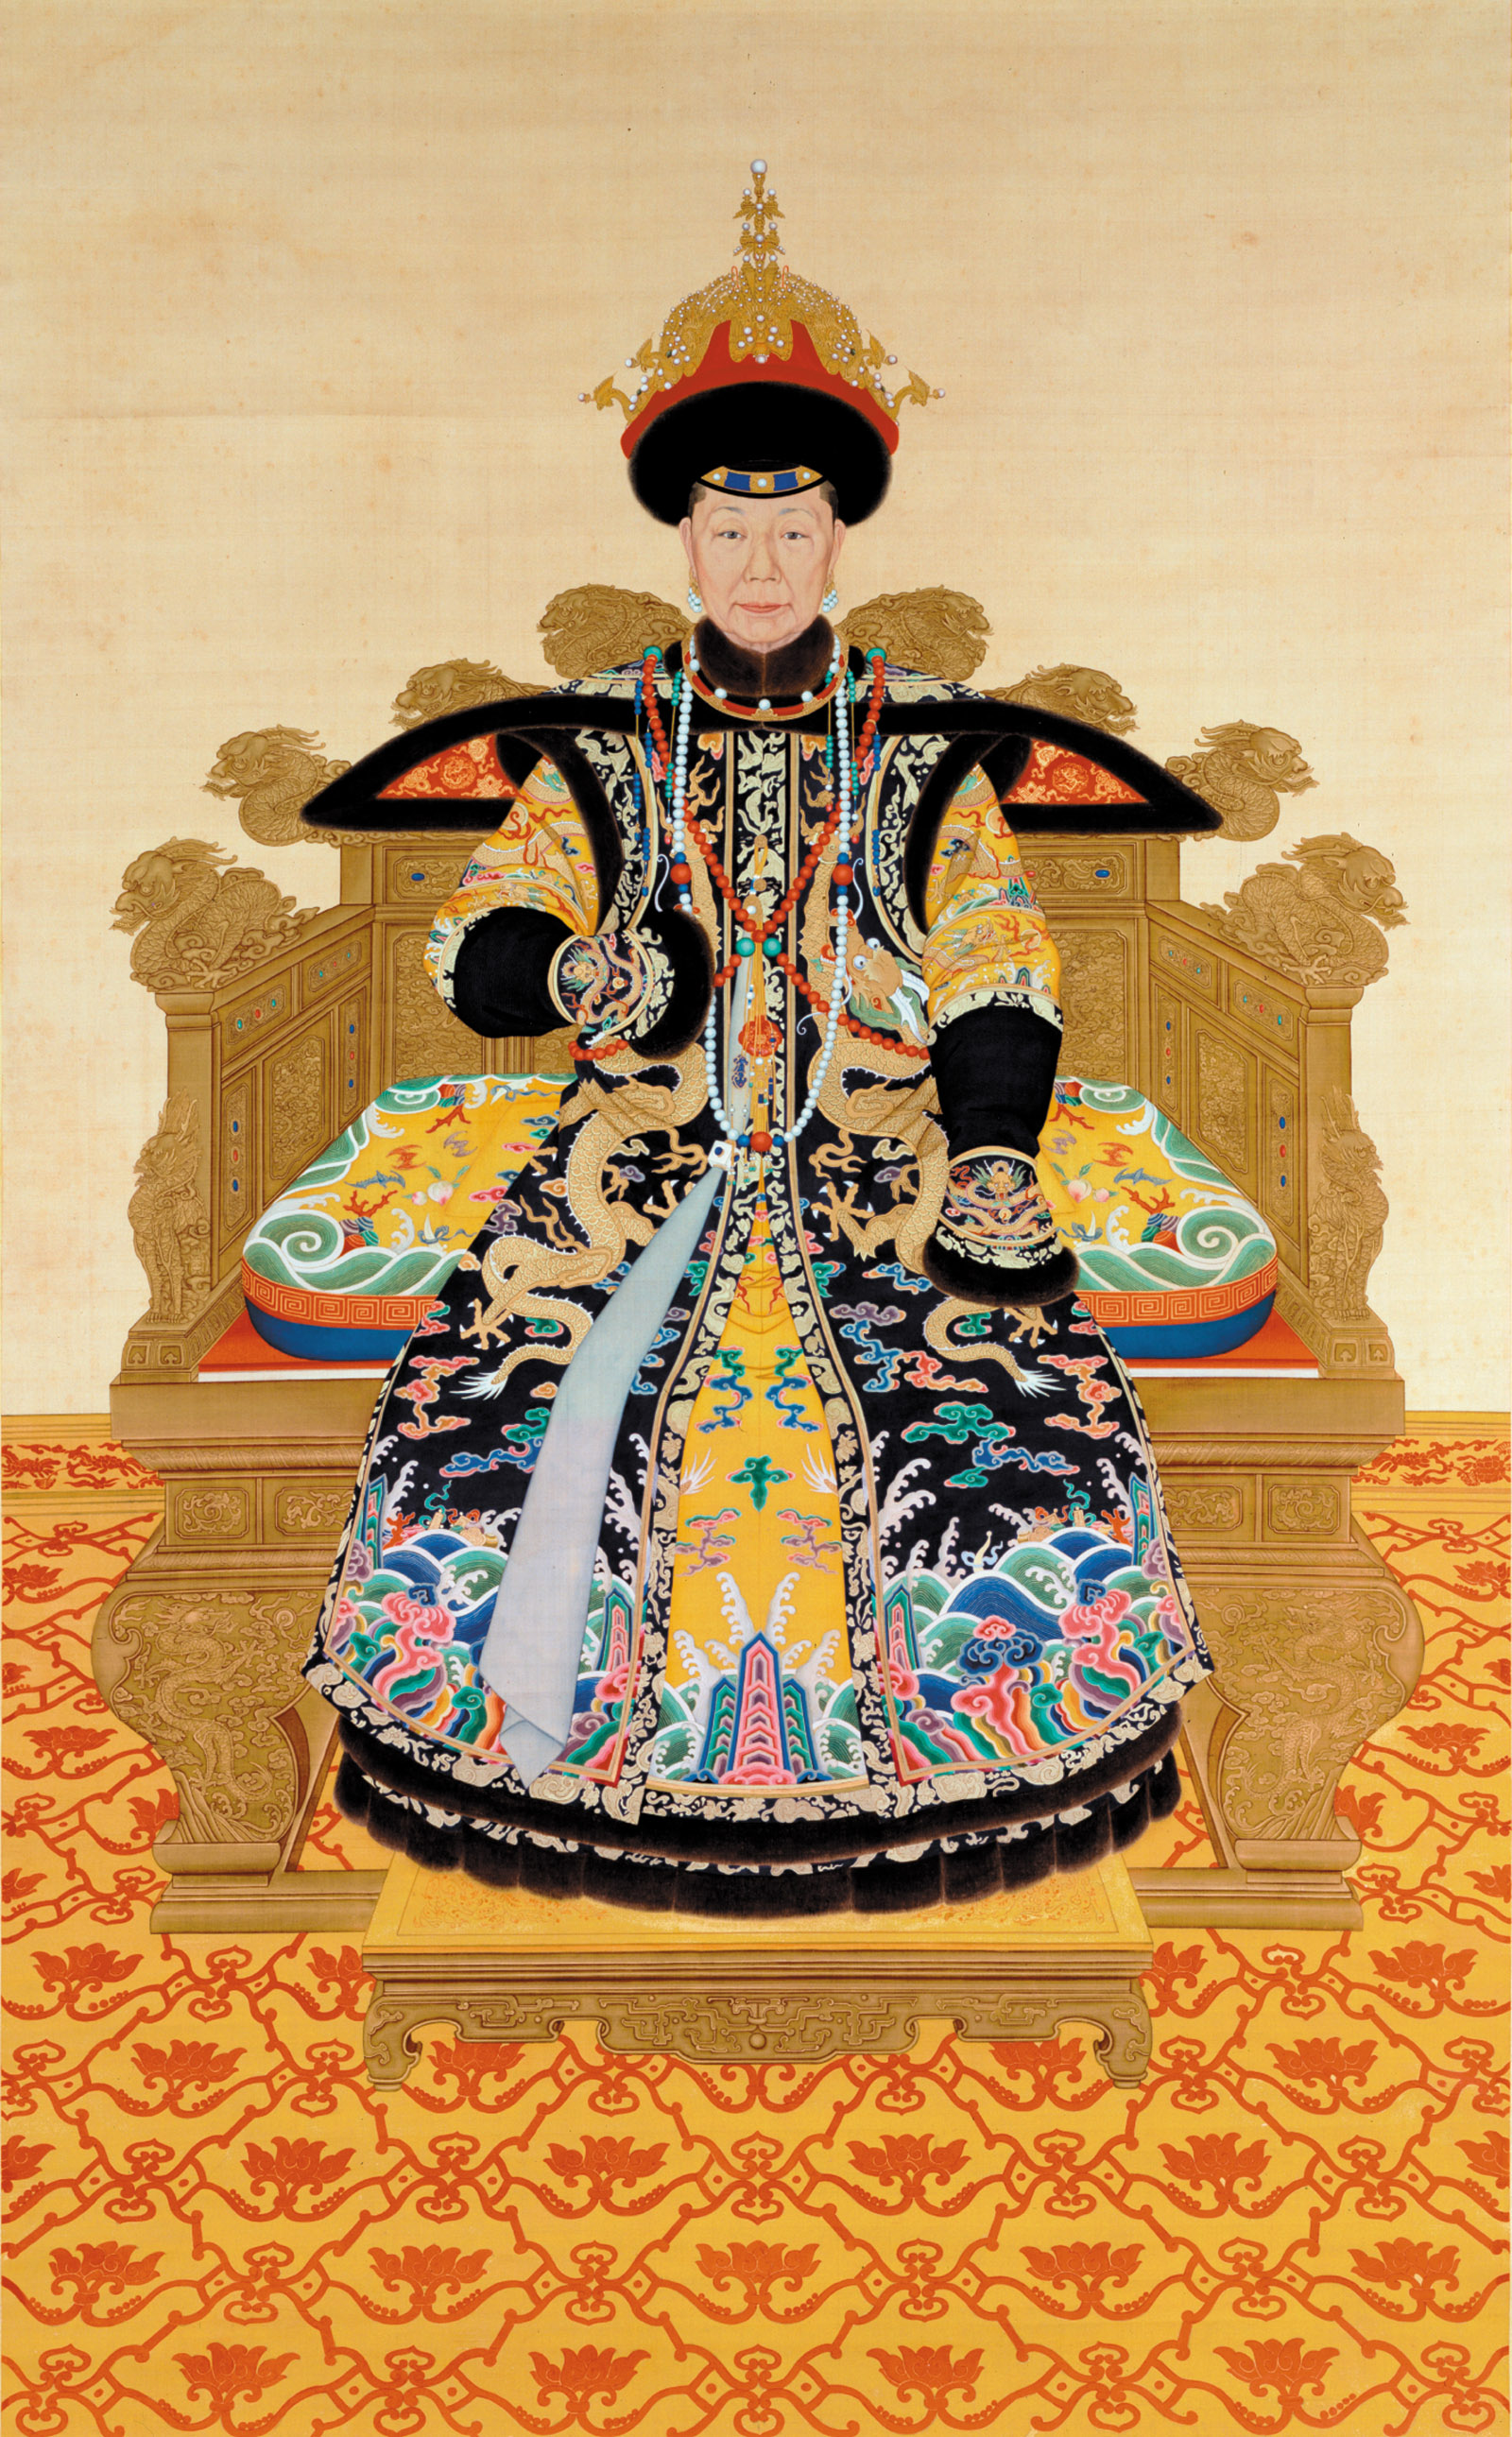 Empress Dowager Chongqing at the Age of Eighty